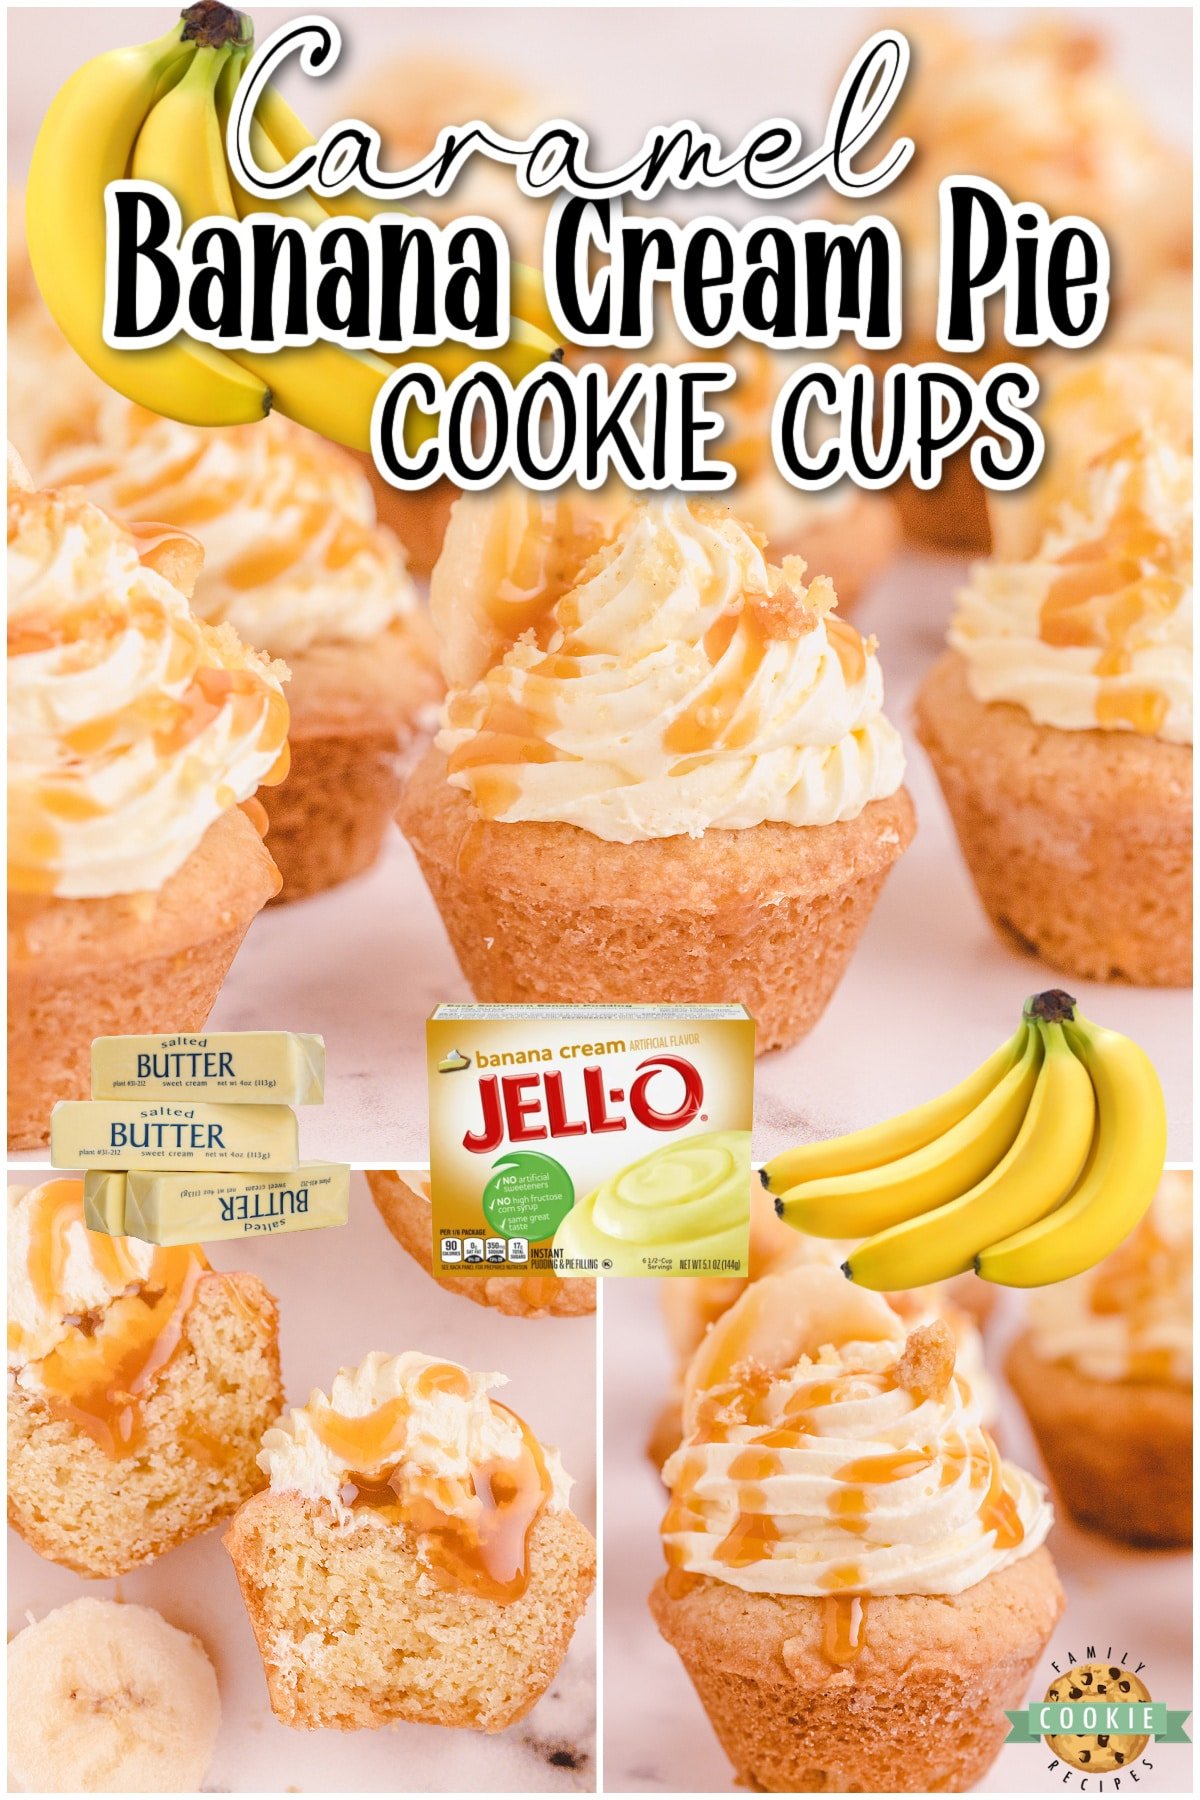 Caramel Banana Cream Pie Cookies are banana cream pie in cookie form! Creamy banana filling with caramel all in a sugar cookie cup for an indulgent treat everyone loves! 